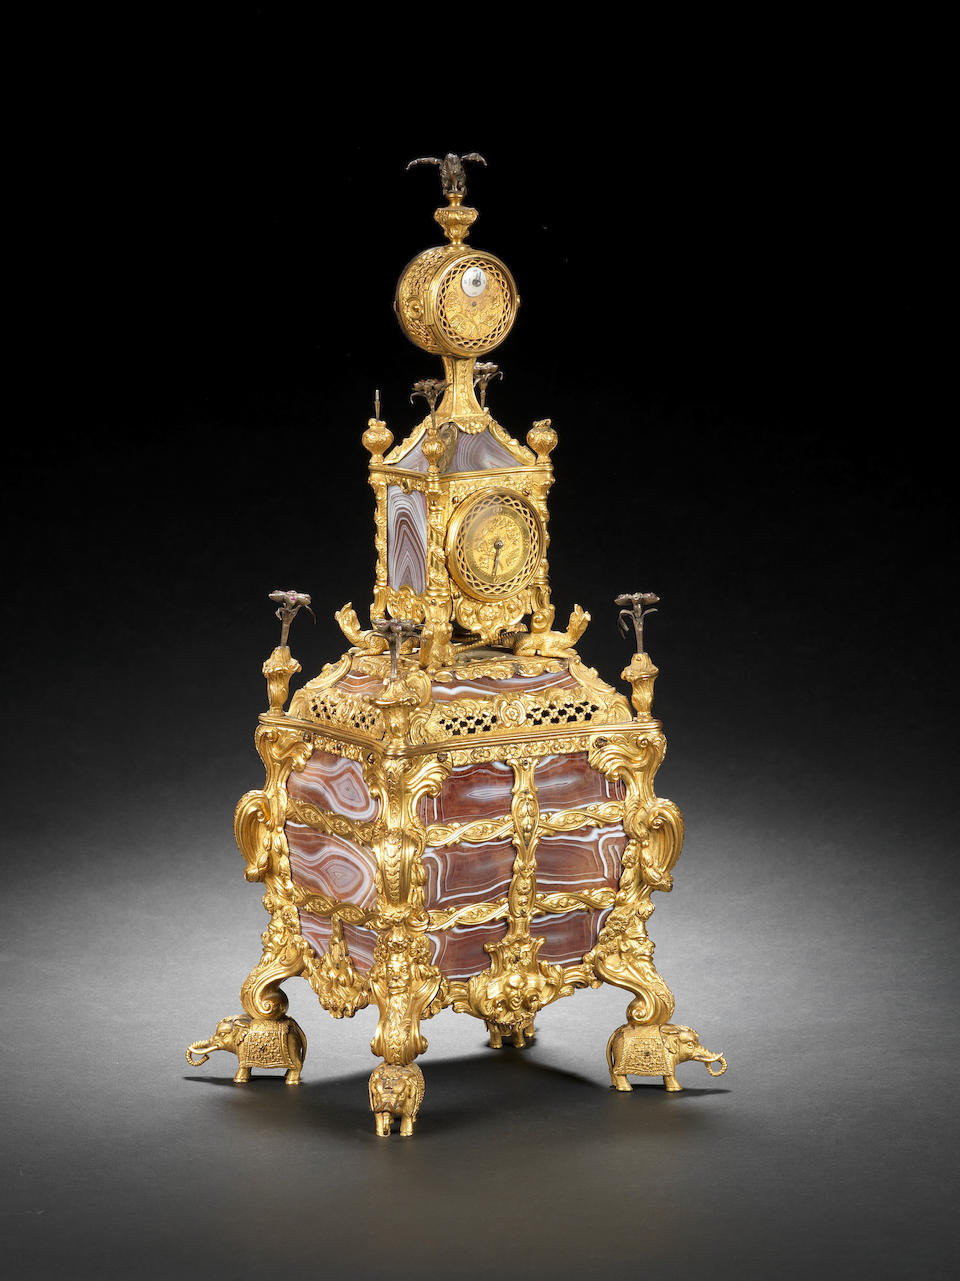 An exceptional mid 18th century agate-panelled and silver-mounted musical ormolu table clock with moonphase indication. Sold with the original key, signed and dated key, James Cox, London, 1766. James Cox, London 2